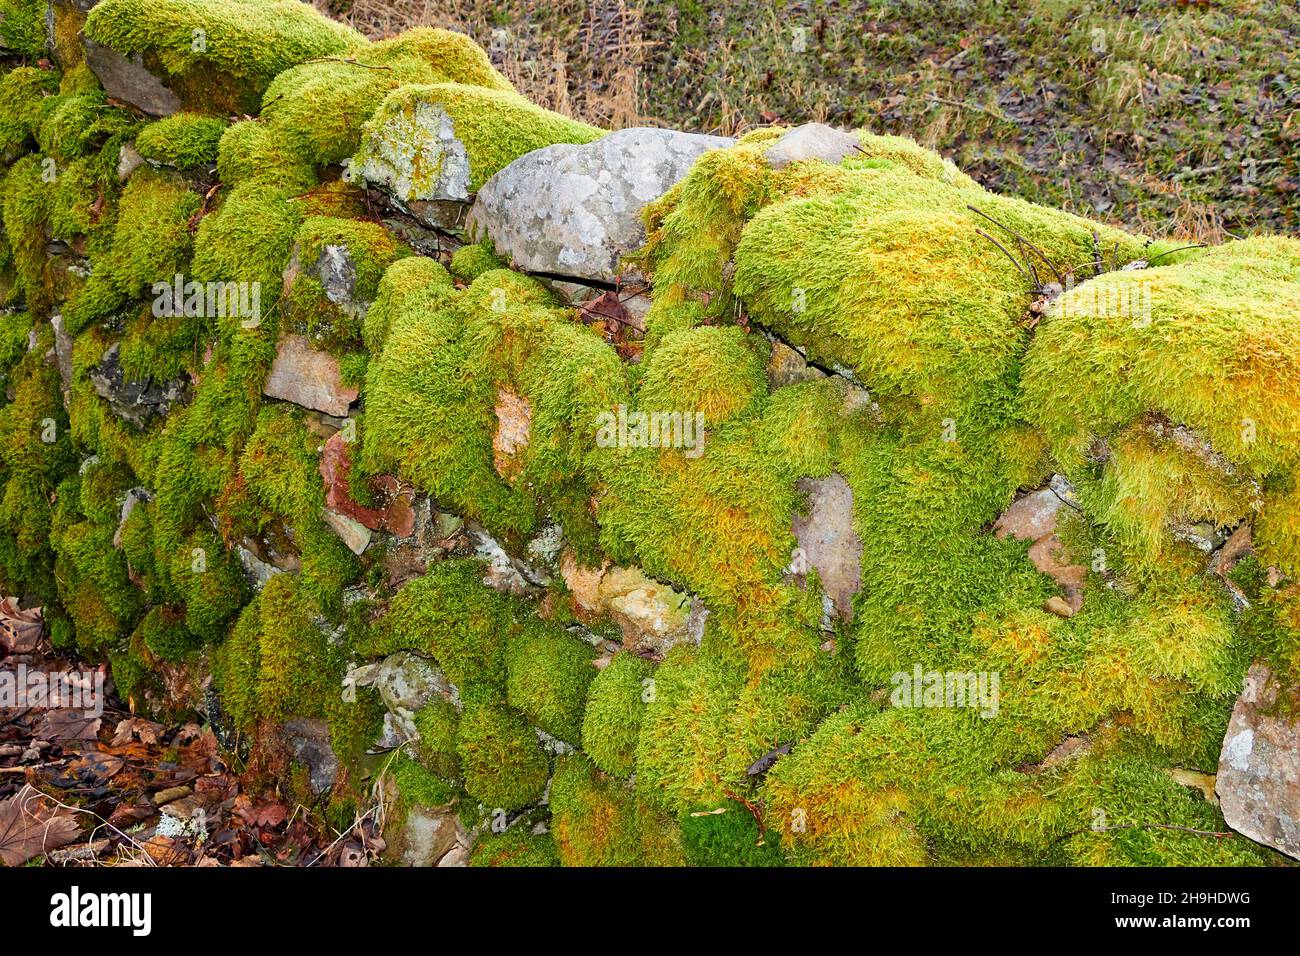 GROWTHS OF MOSS Bryophyta GROWING ON LICHEN COVERED STONES IN AN OLD WALL Stock Photo